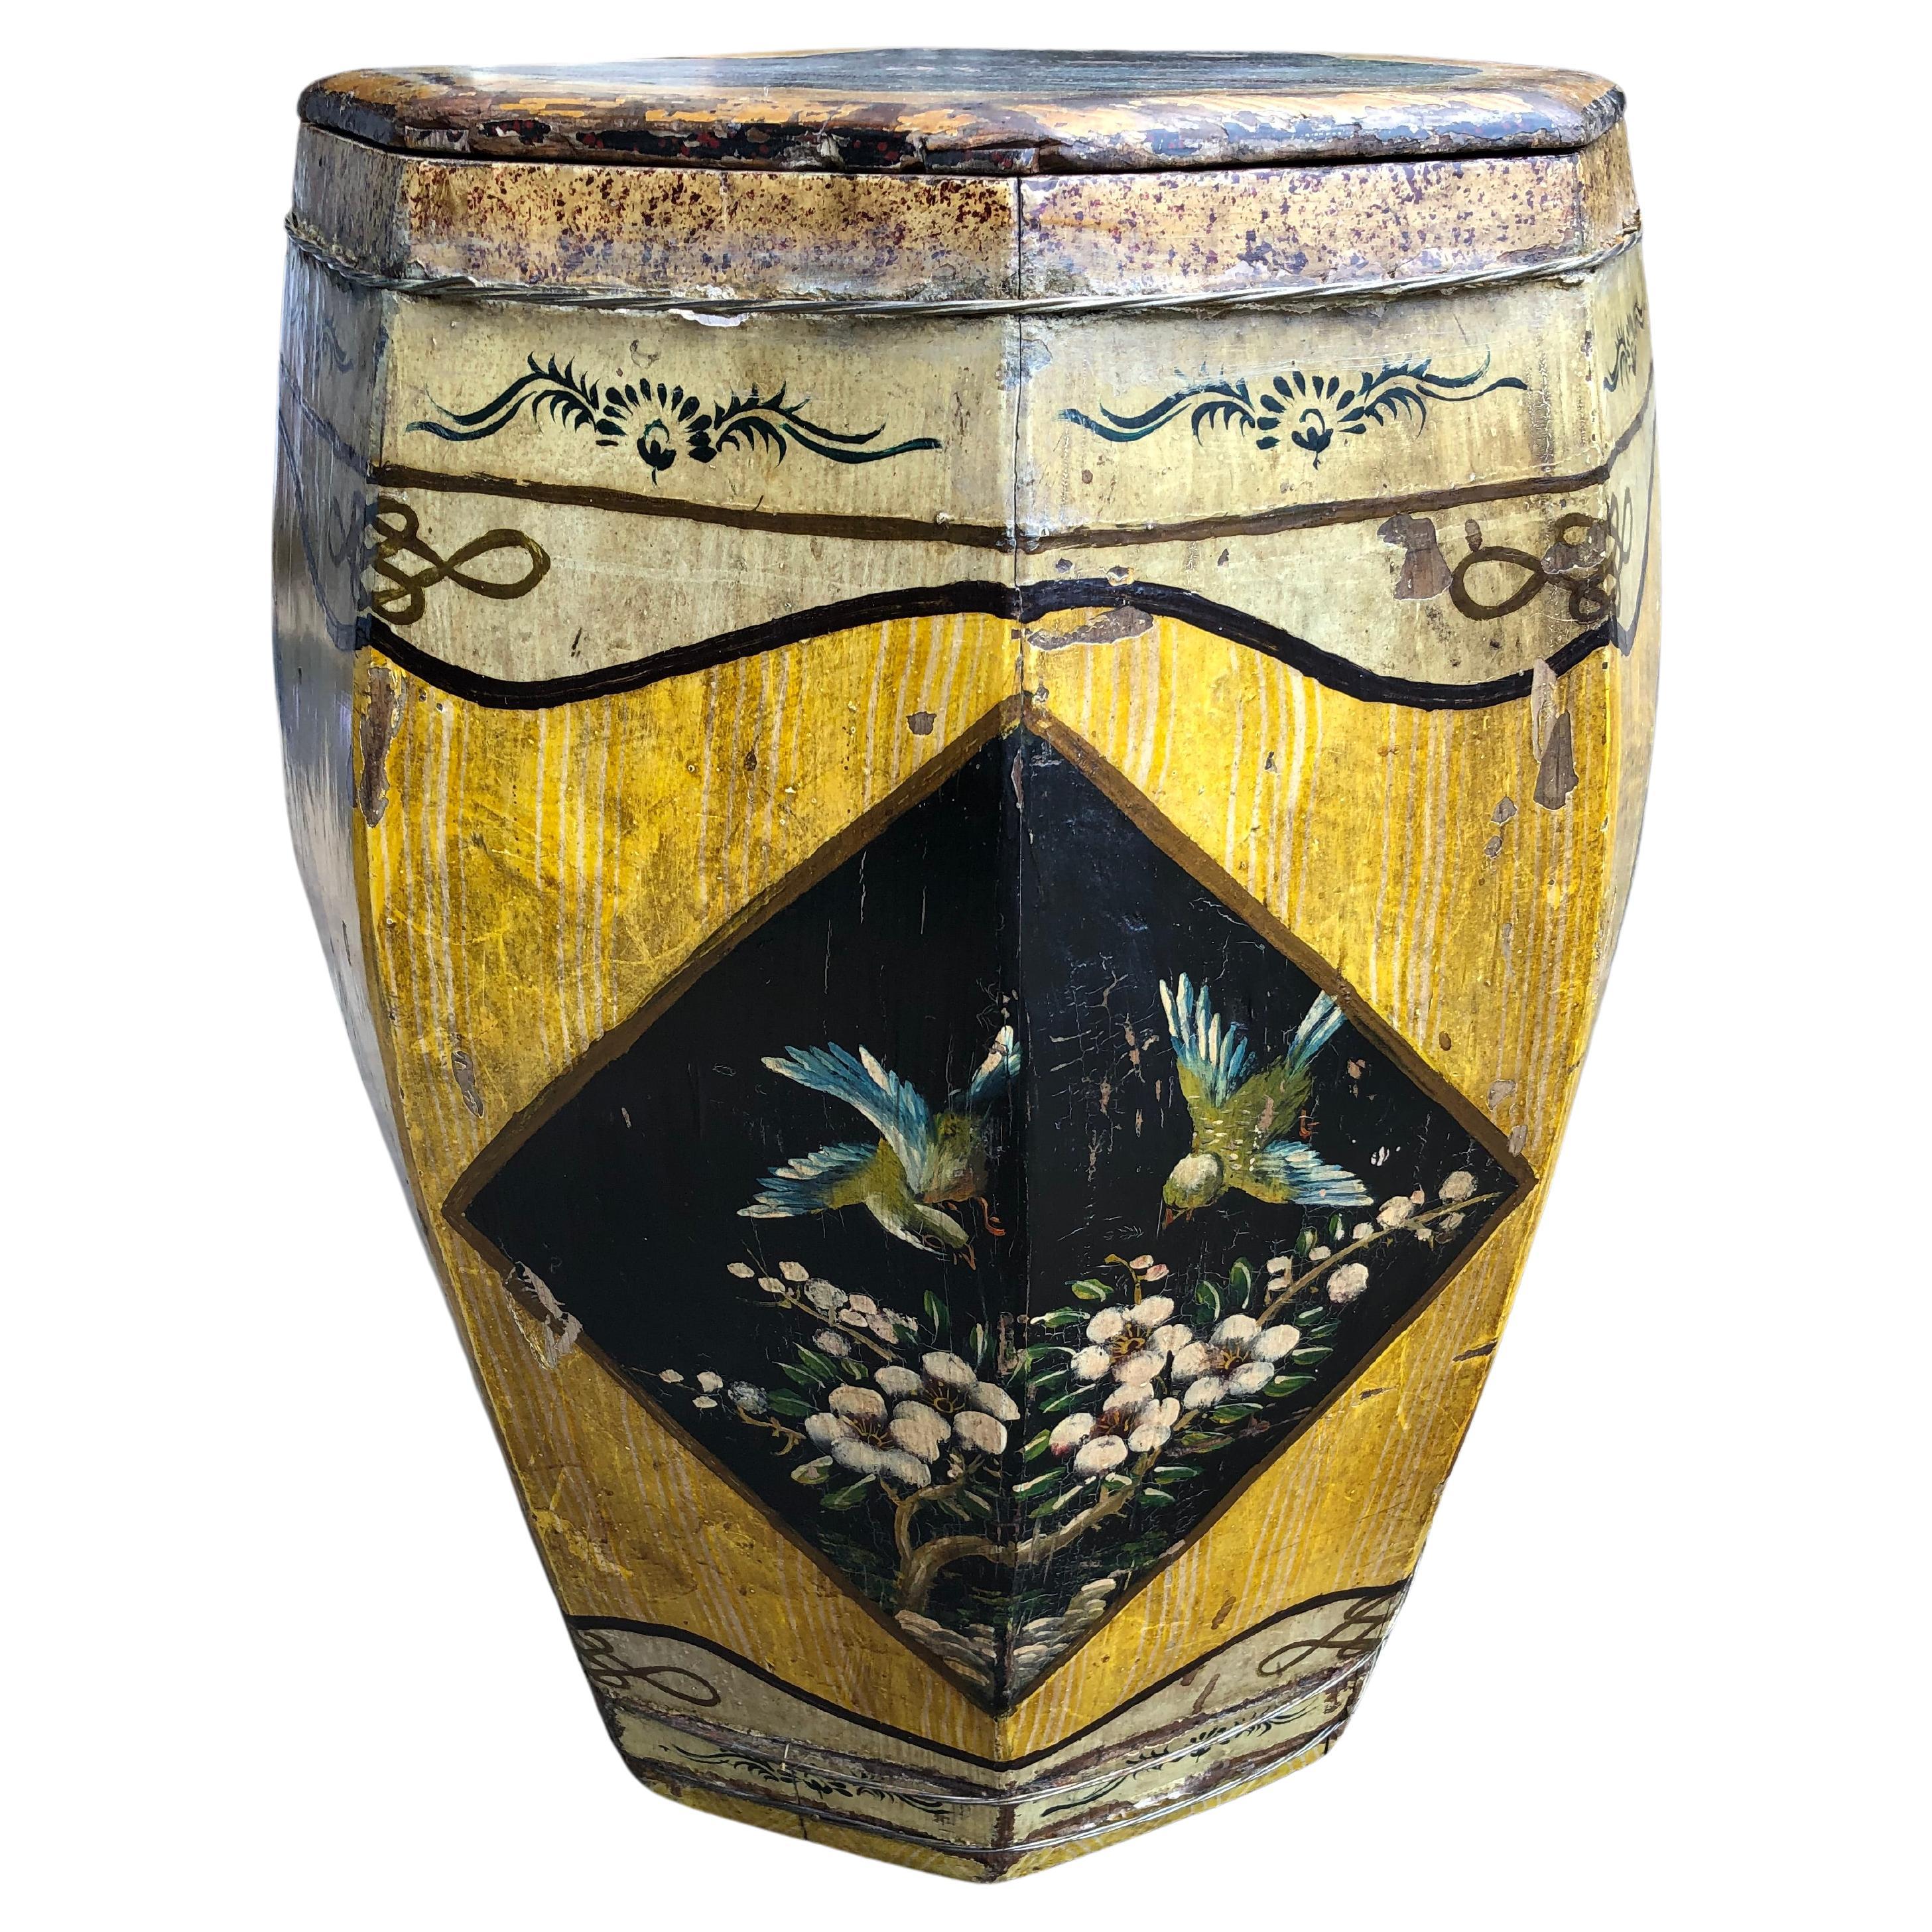 Charming Rare Round Wooden Rice Bin End Table For Sale